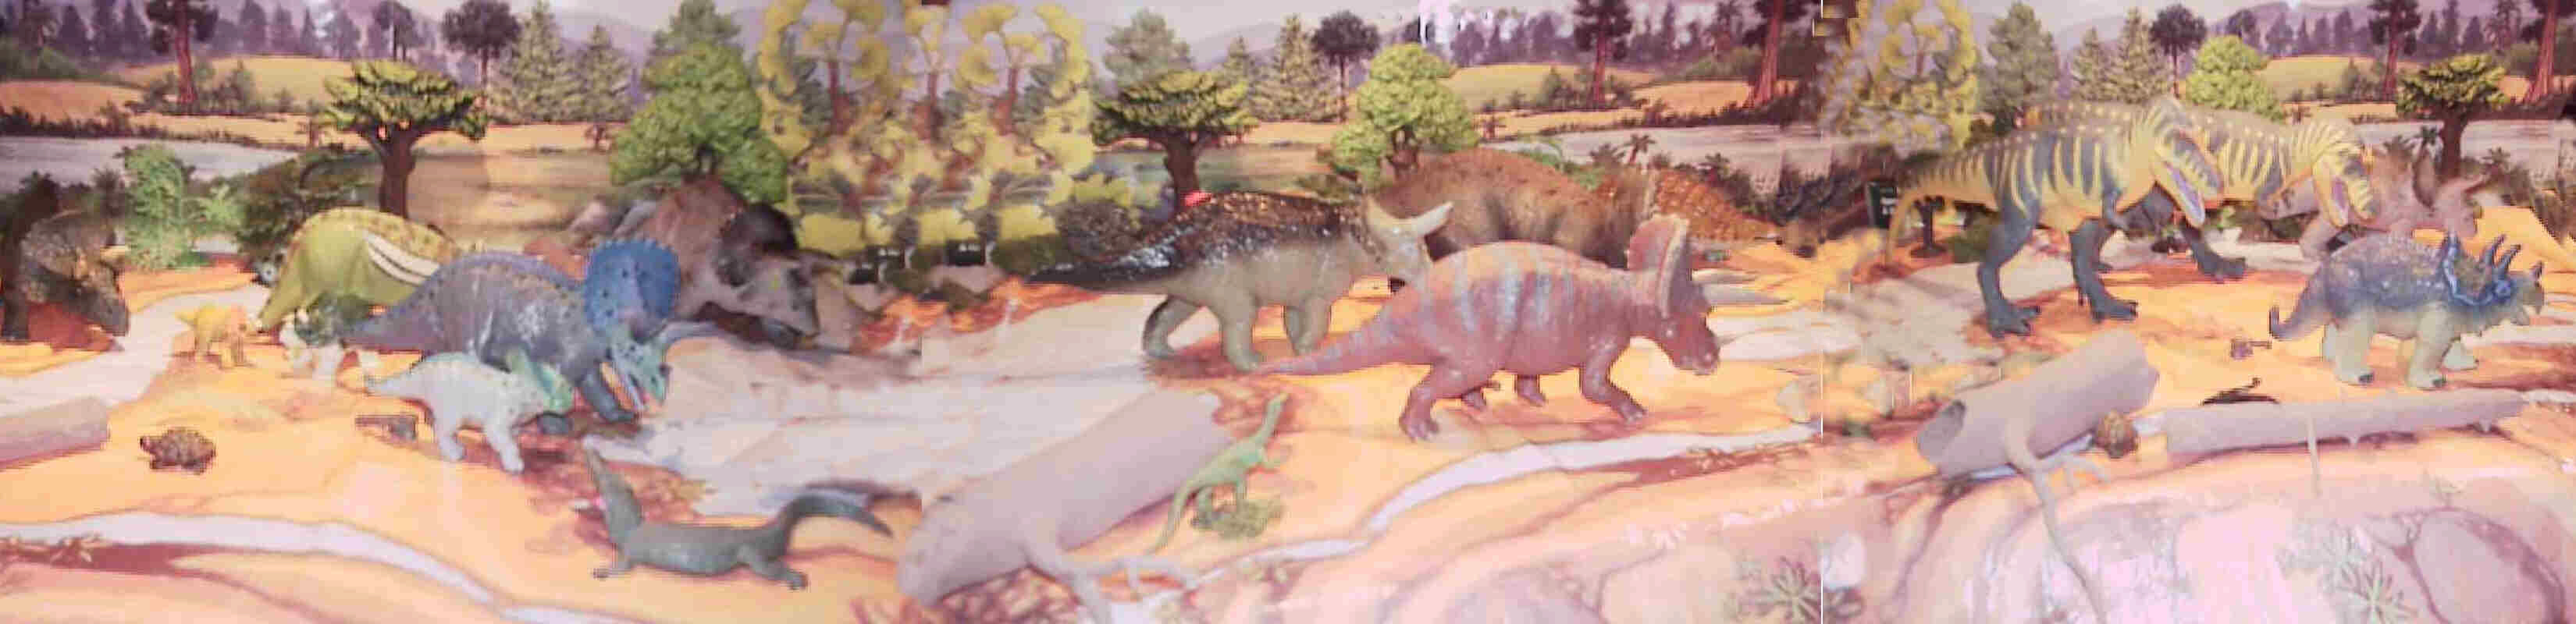 Triceratops is a popular and almost a required figure for a dinosaur line.  Starting from the left we a front half of a Schleich then a green Invicta  Triceratops., a Wild Safari adult and calf, further back a gray UKRD.  Then next a trio the older green  Carnegie Safari, a Bullyland and then a striped Battat Triceratops.  Then we have two different versions of the Battat Tyrannosaurus   Boston Museum figures.  The last Battat figure balanced by its tail  and the earlier figure with the tail raised.  Unfortunately the original more attractive and realistic figure tends to fall over.  An interim fix put snowshoe like bases on the feet but a three-point stance was eventually needed to keep the figure upright.  Last a PlayVision tric.